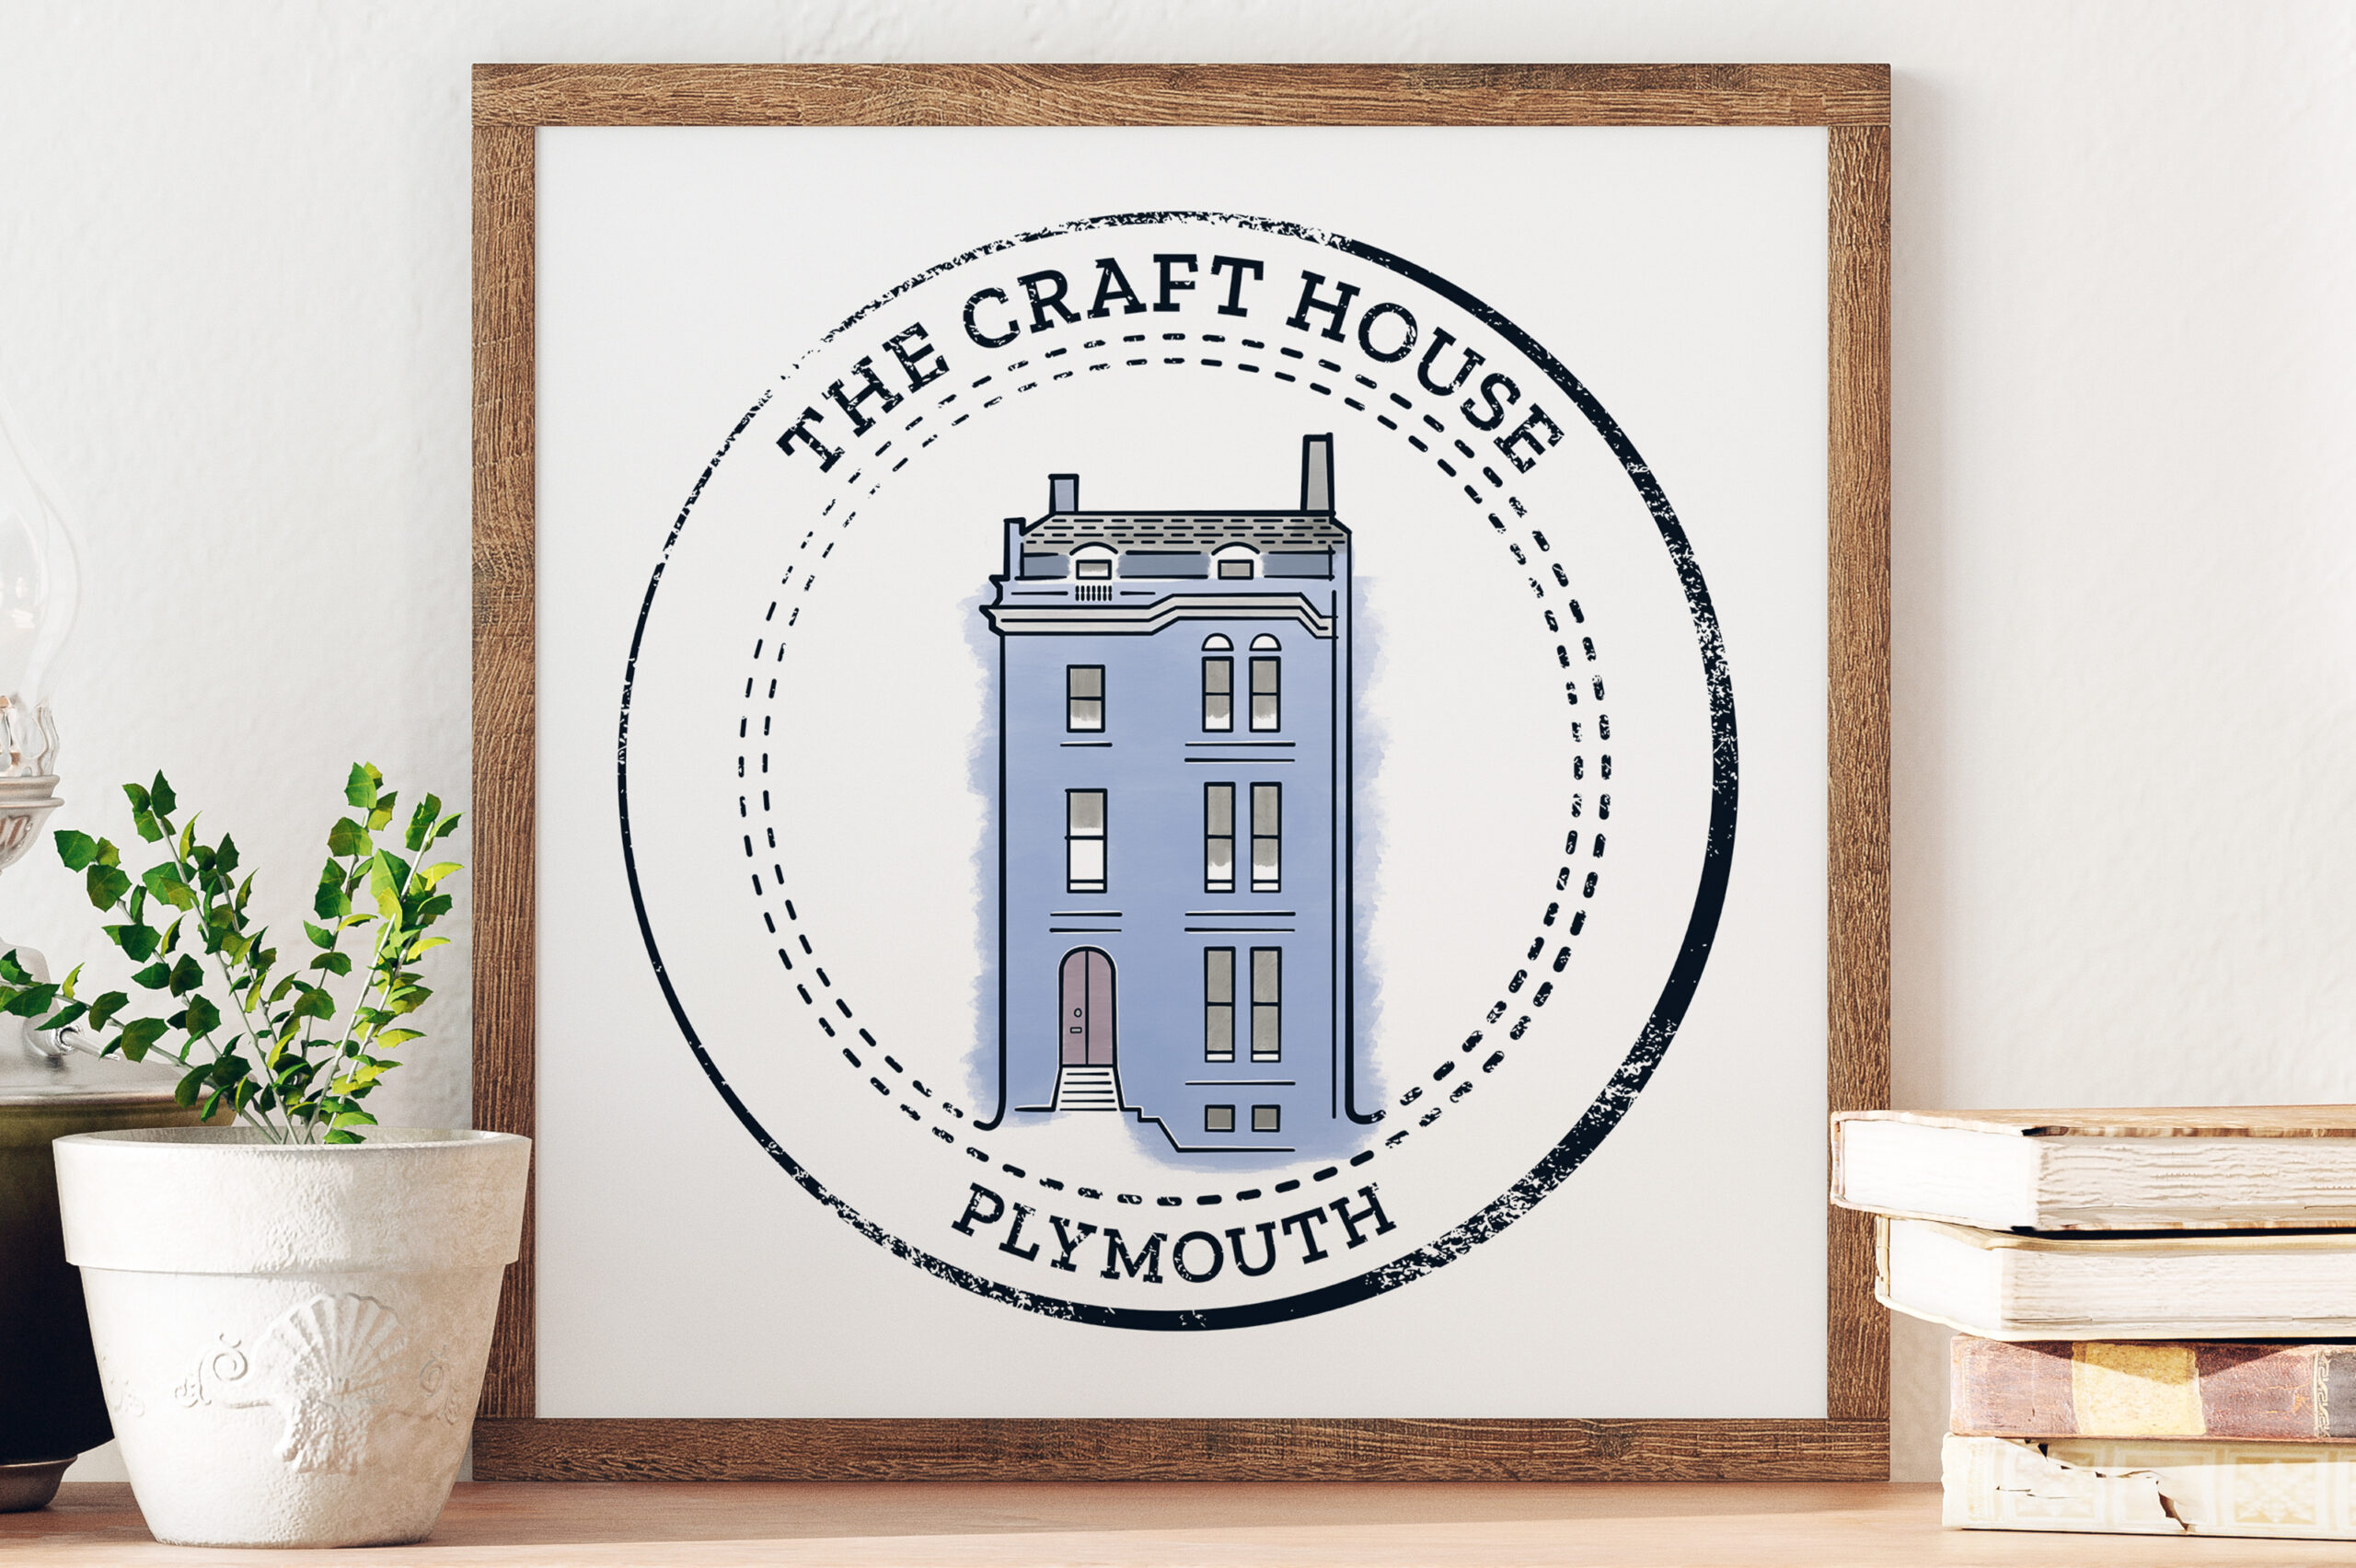 Logo for The Craft House Plymouth - Plymouth based hotel